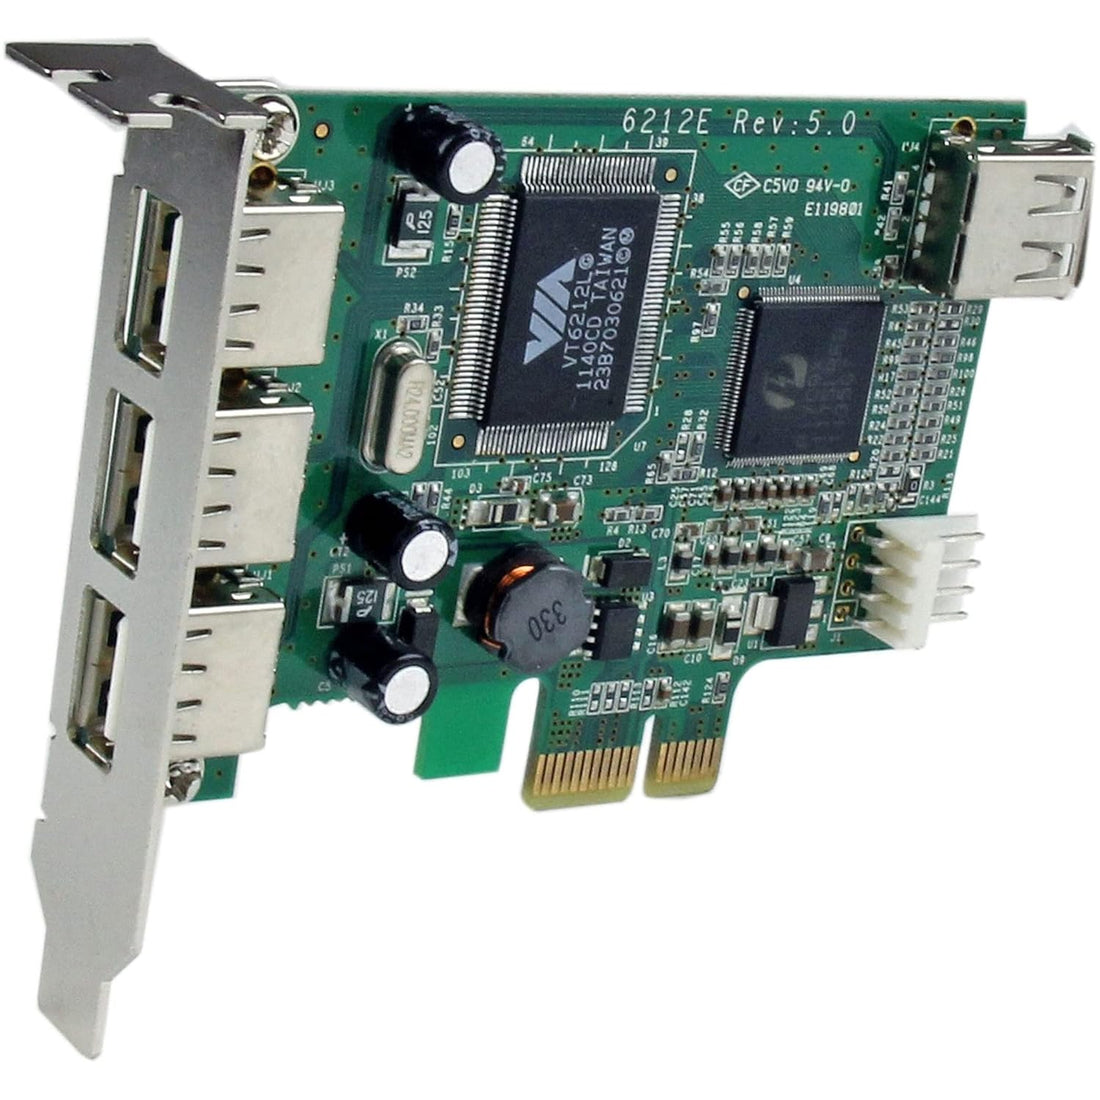 4 Port PCI Express Low Profile High Speed USB Card - PCIe USB 2.0 Card - PCI-E USB 2.0 Card